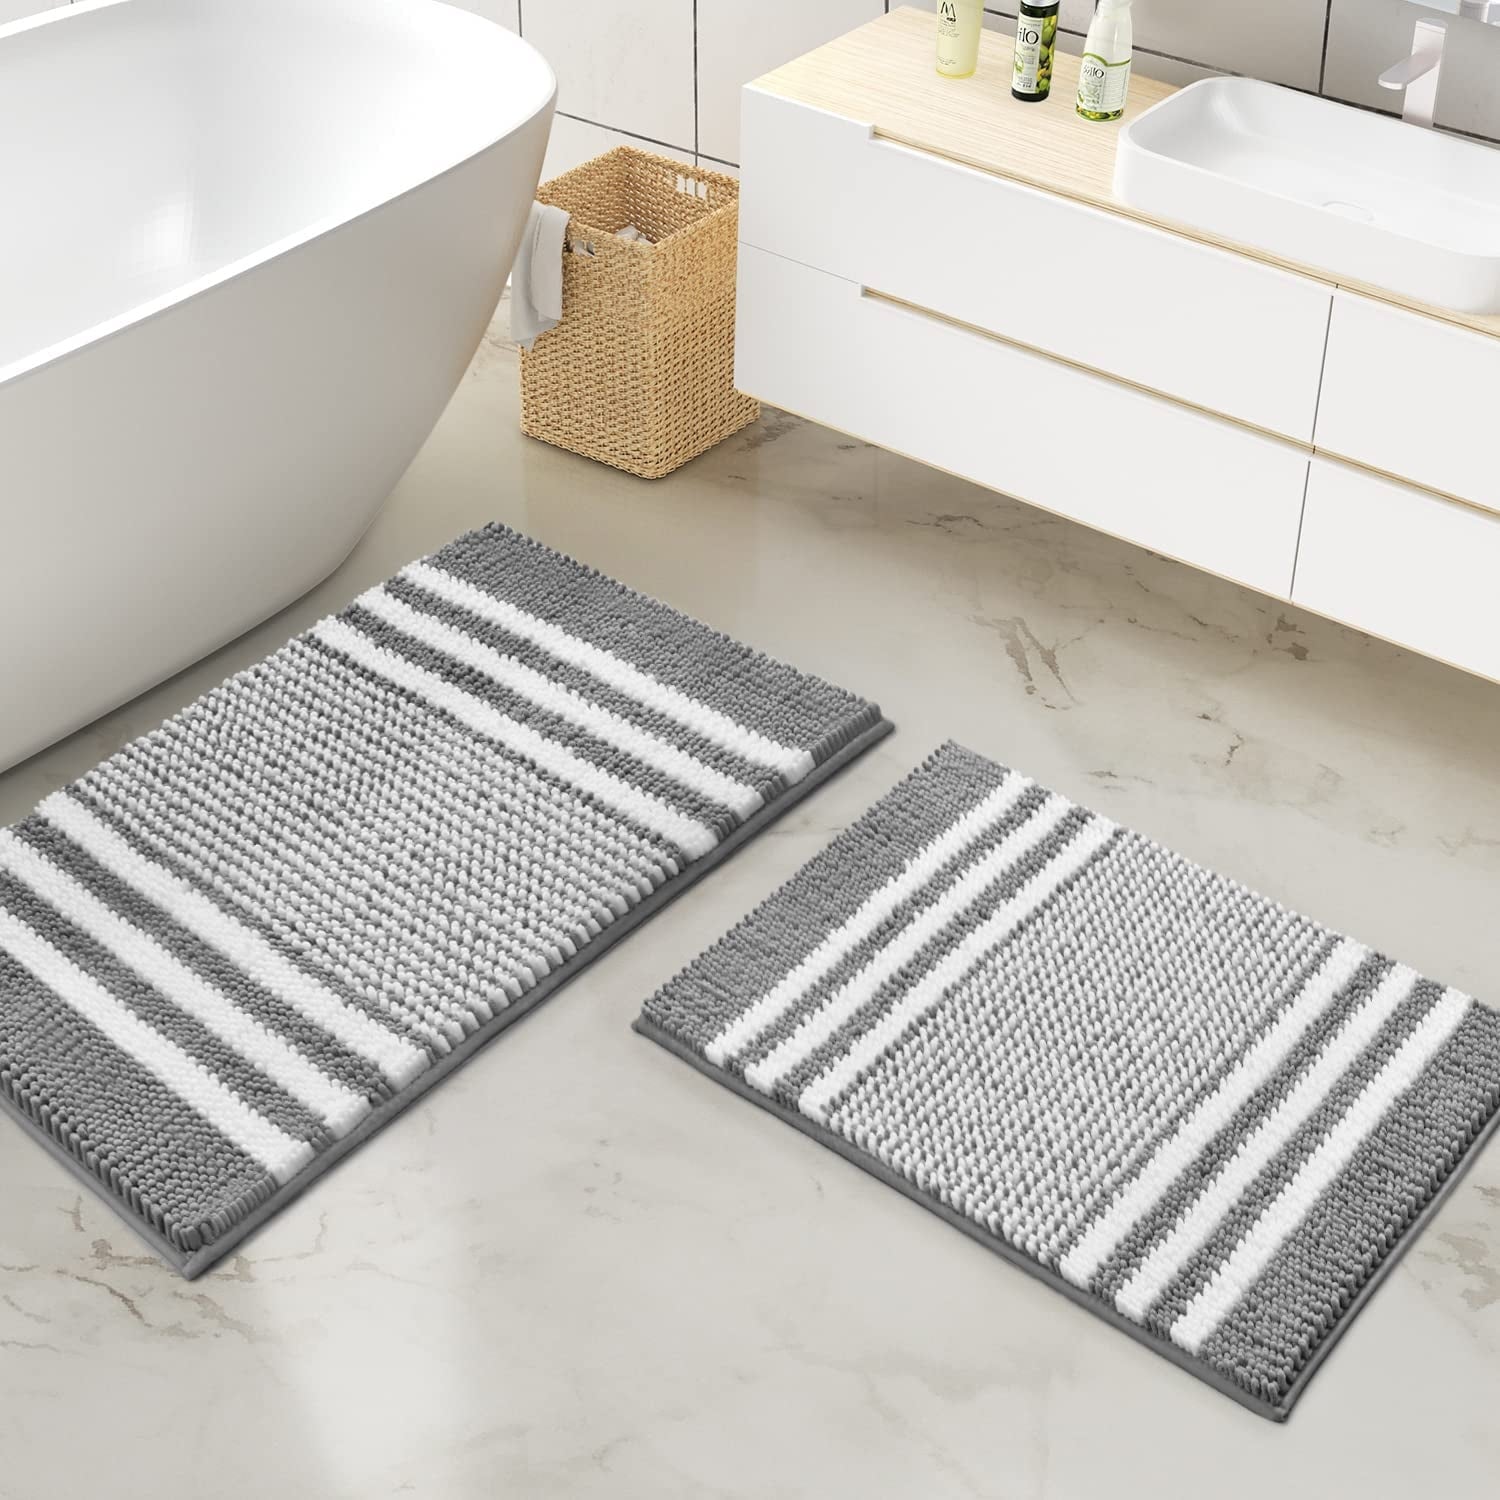 https://ak1.ostkcdn.com/images/products/is/images/direct/e03c358ce56256faf35a1f23ede2a0063e68d3f9/Extra-Soft-and-Absorbent-Fluffy-Striped-Chenille-Bath-Mat-Rug-Set%2C16%22-x-24%22.jpg